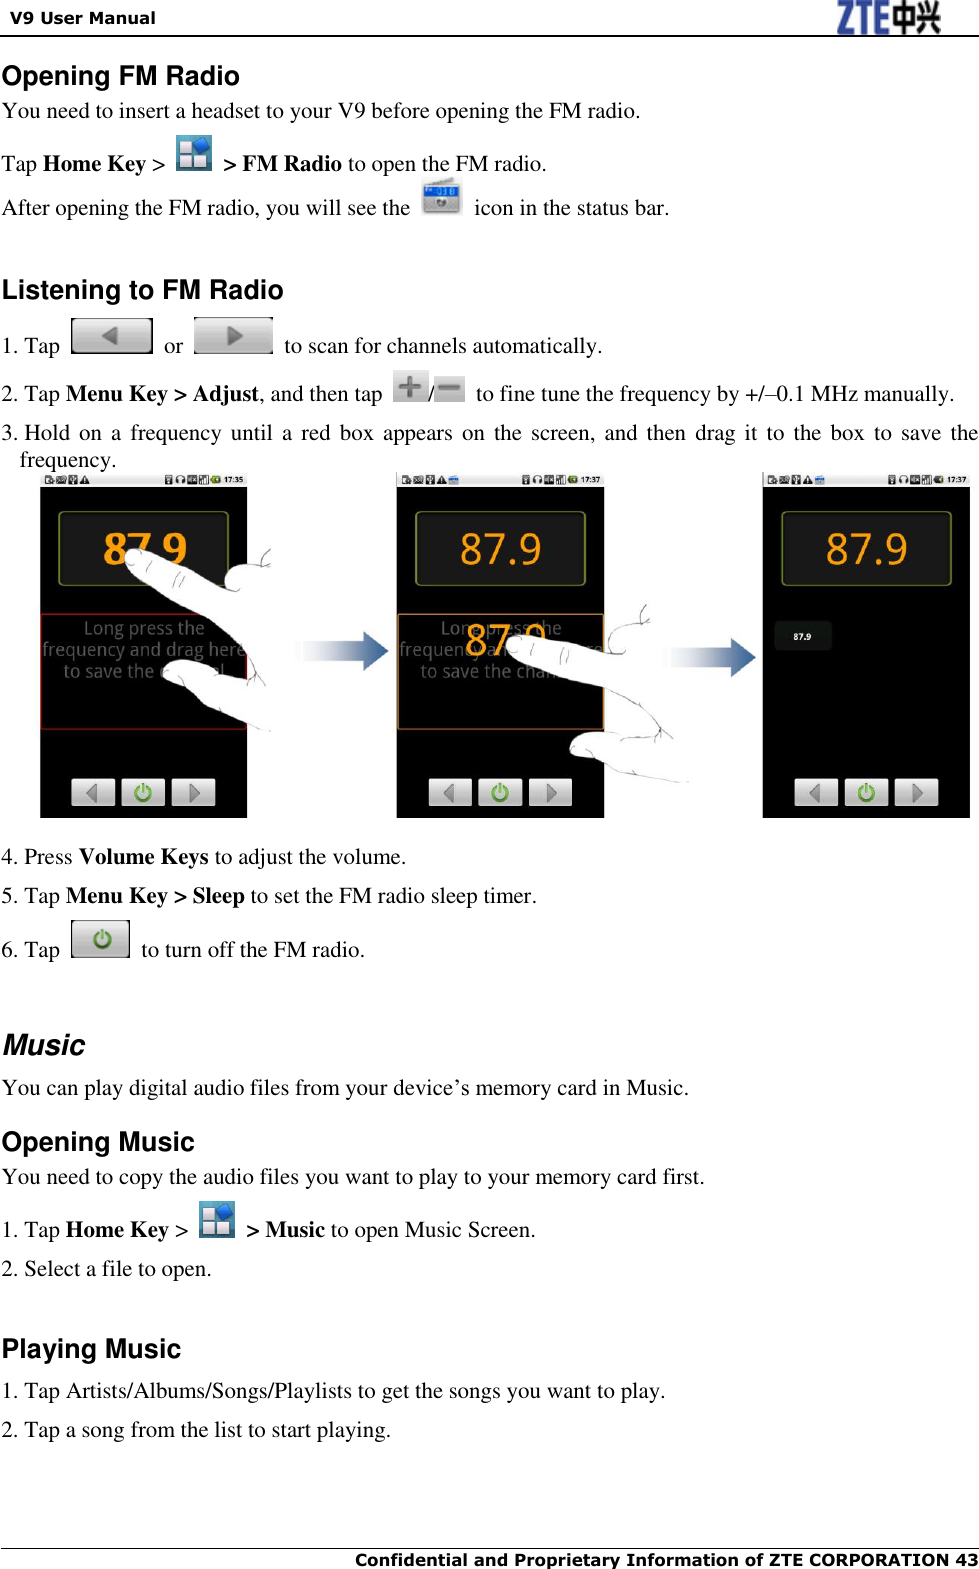   V9 User Manual  Confidential and Proprietary Information of ZTE CORPORATION 43   Opening FM Radio You need to insert a headset to your V9 before opening the FM radio. Tap Home Key &gt;    &gt; FM Radio to open the FM radio. After opening the FM radio, you will see the    icon in the status bar.   Listening to FM Radio 1. Tap    or    to scan for channels automatically. 2. Tap Menu Key &gt; Adjust, and then tap  /   to fine tune the frequency by +/–0.1 MHz manually. 3. Hold on  a frequency until  a red  box  appears on the  screen, and then  drag it  to  the box to save the frequency.   4. Press Volume Keys to adjust the volume. 5. Tap Menu Key &gt; Sleep to set the FM radio sleep timer. 6. Tap    to turn off the FM radio.   Music You can play digital audio files from your device‟s memory card in Music.   Opening Music You need to copy the audio files you want to play to your memory card first. 1. Tap Home Key &gt;    &gt; Music to open Music Screen. 2. Select a file to open.  Playing Music 1. Tap Artists/Albums/Songs/Playlists to get the songs you want to play. 2. Tap a song from the list to start playing. 